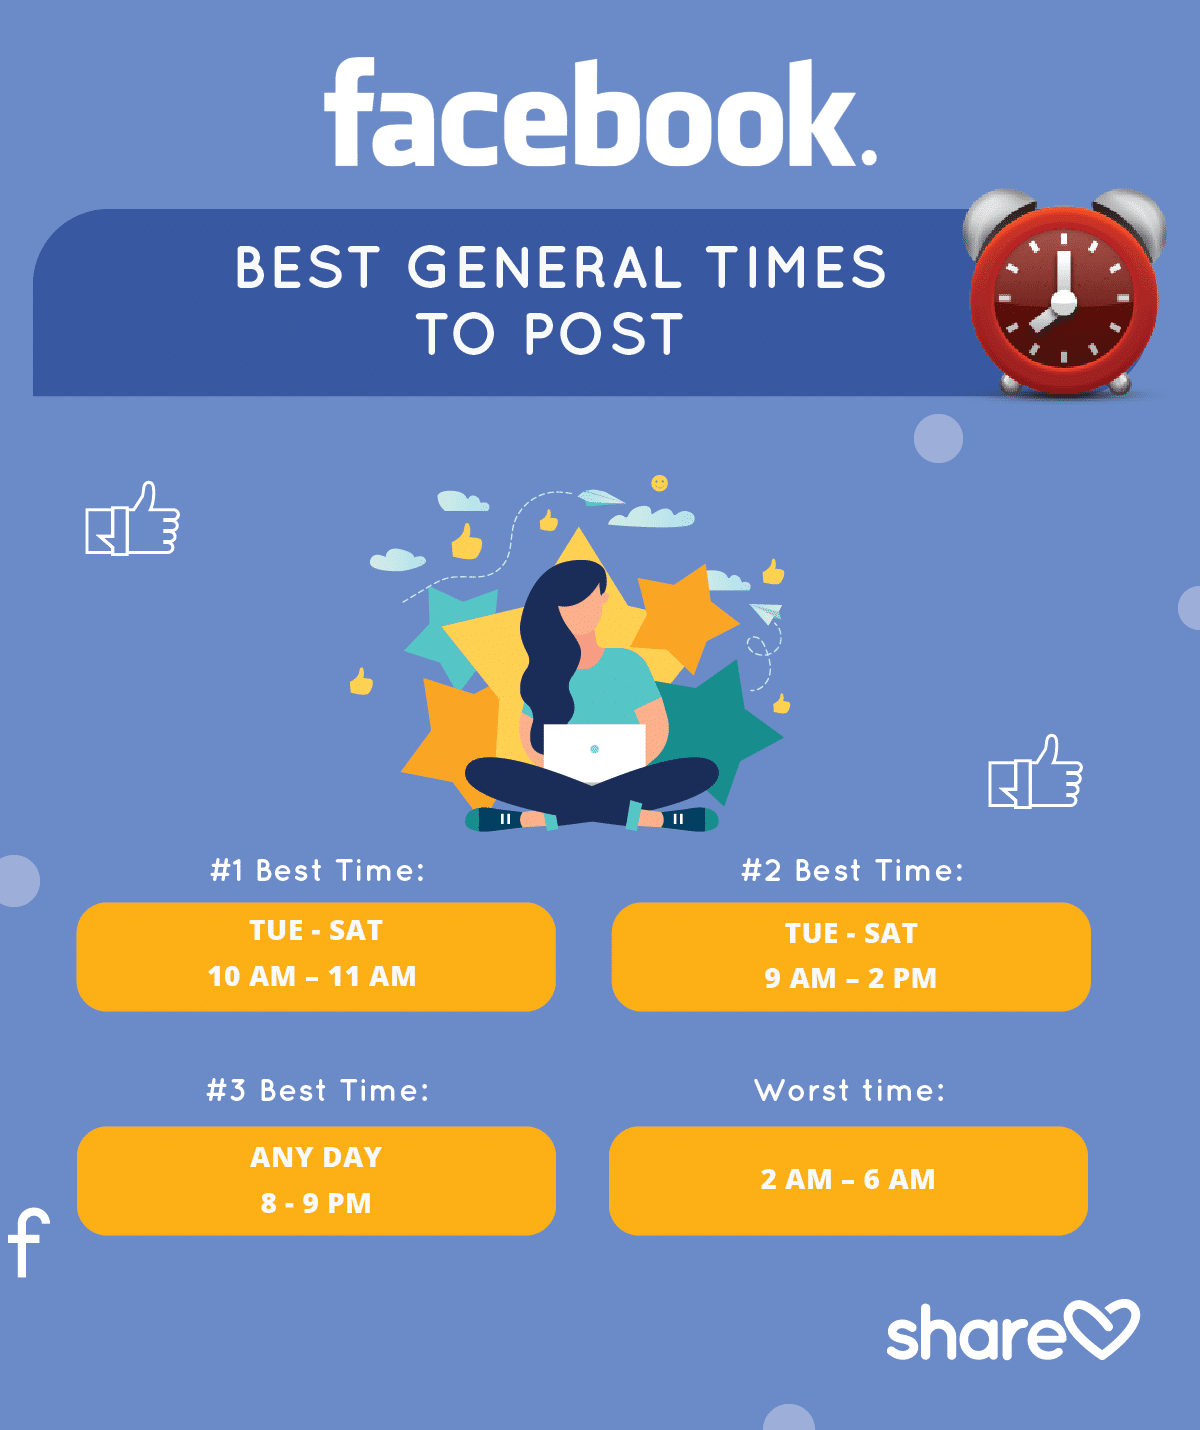 Best General Times to Post on Facebook